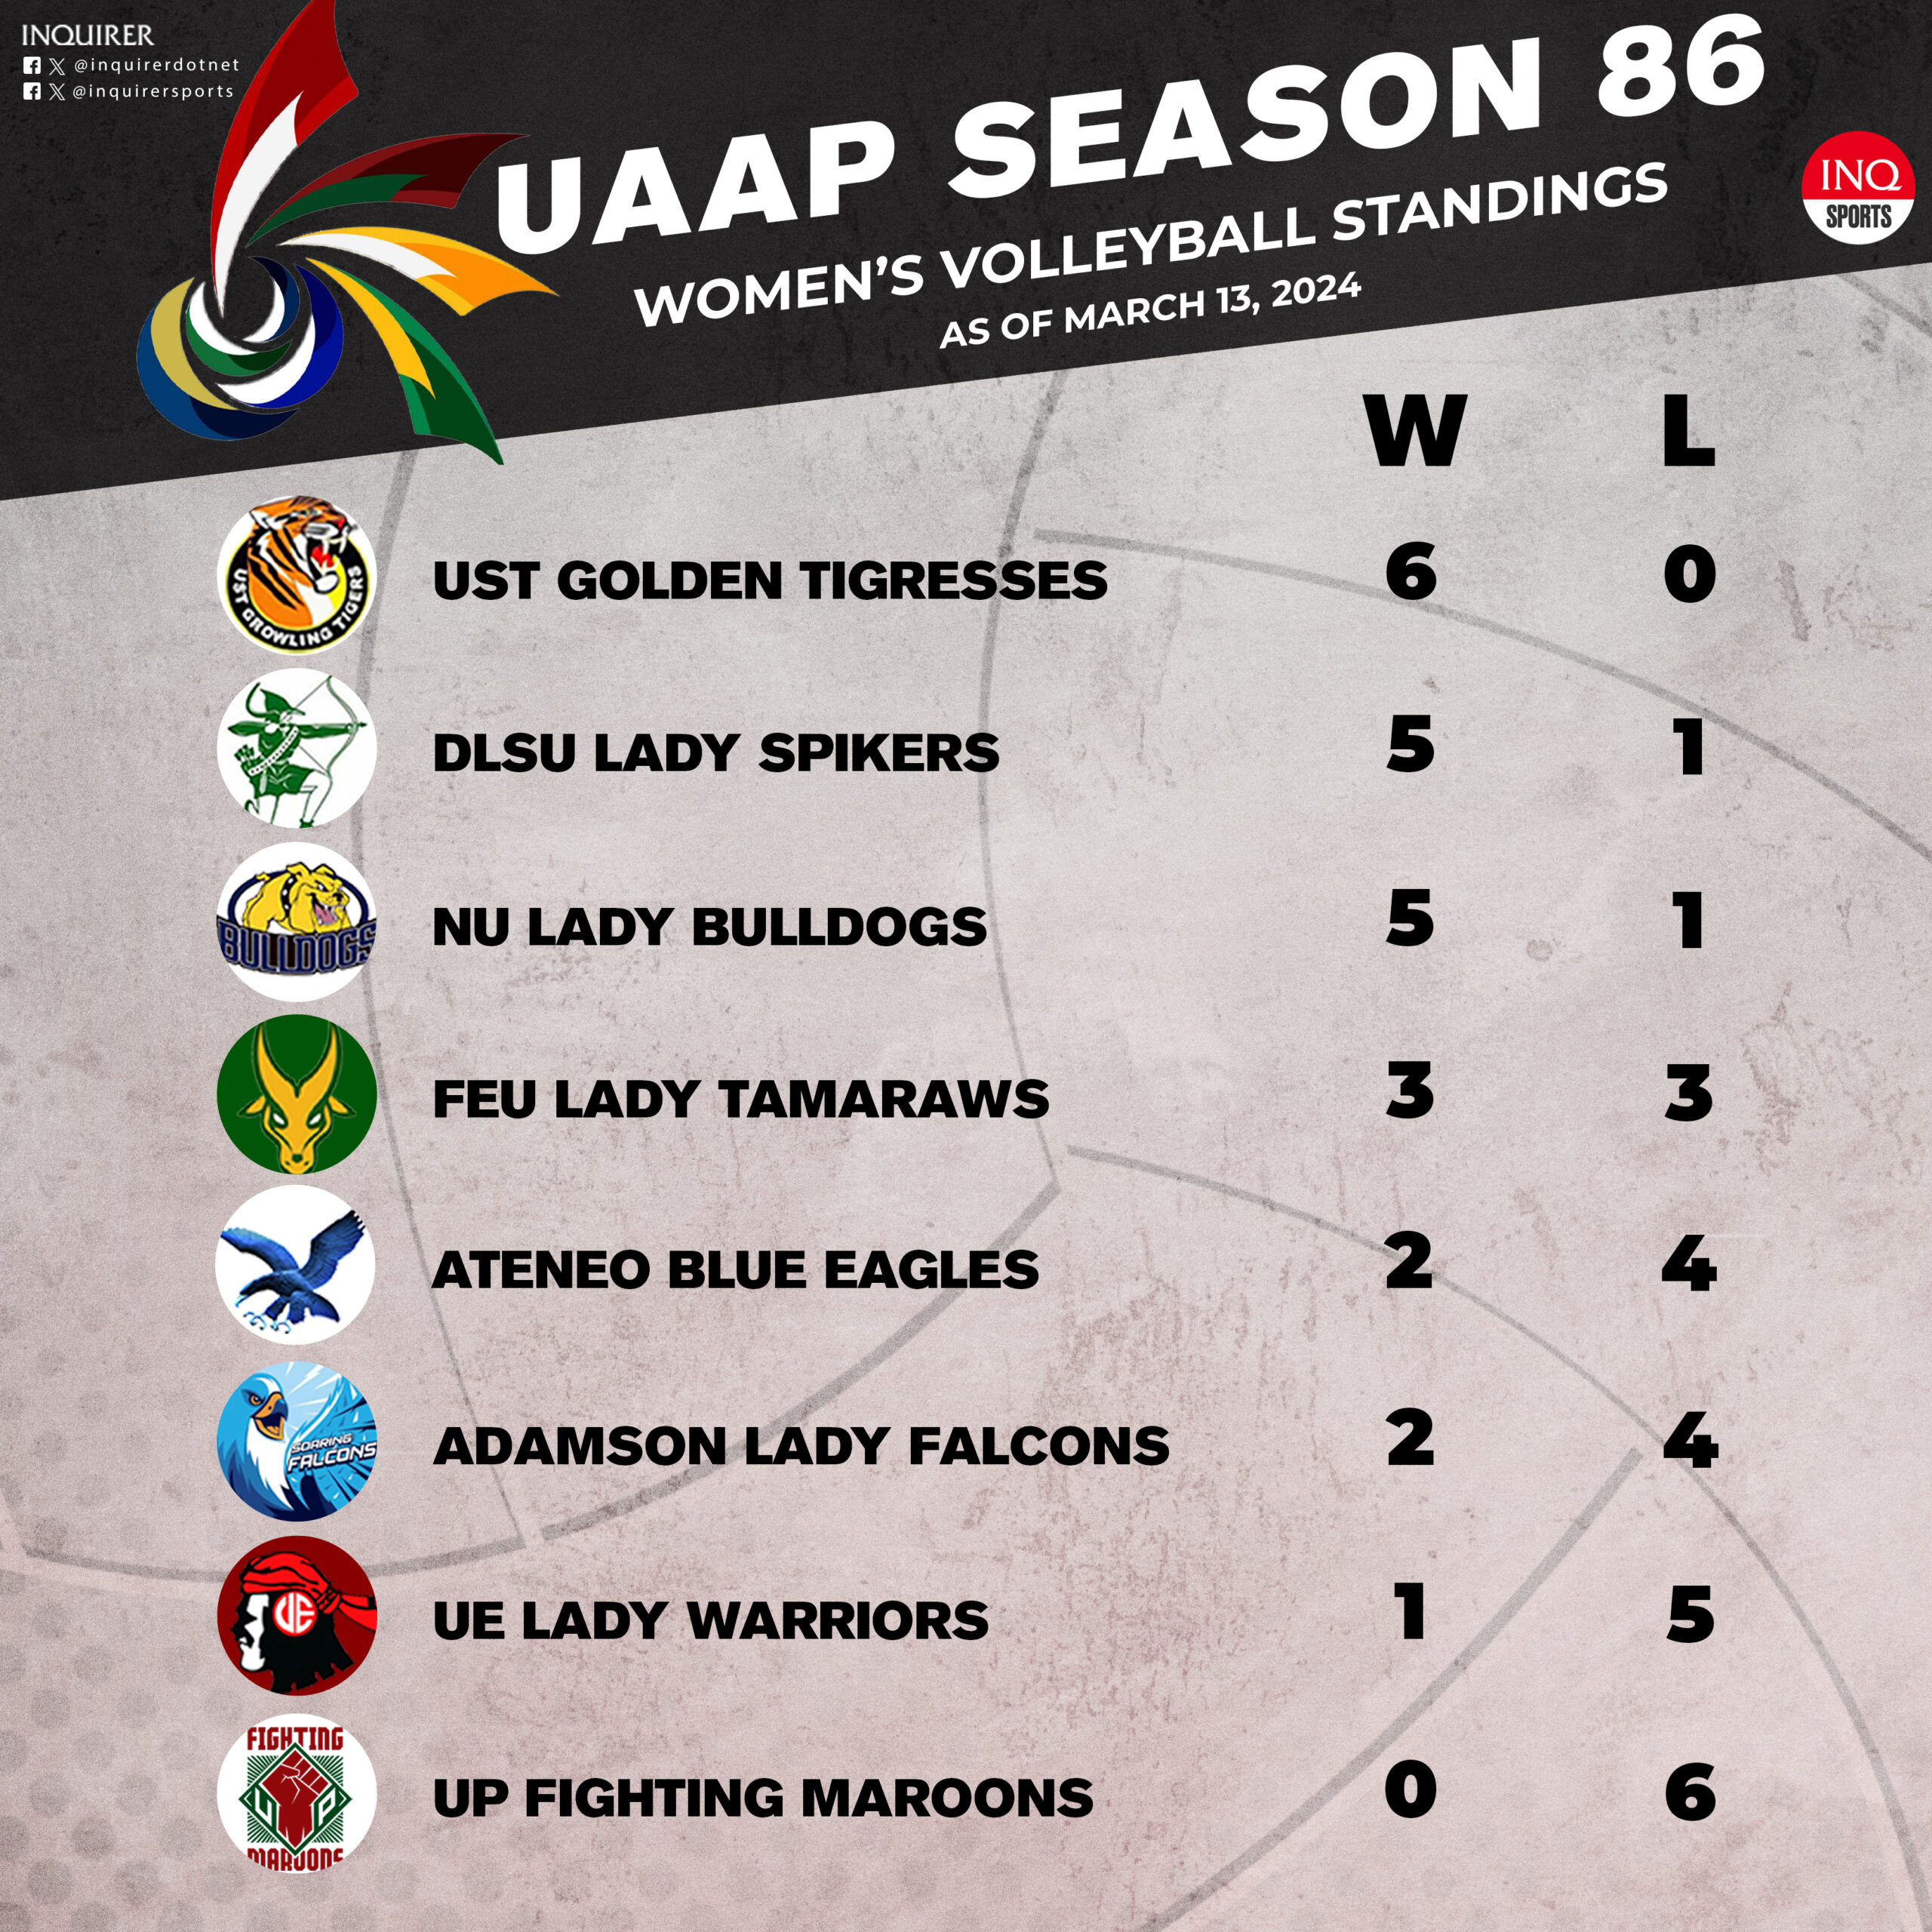 UAAP women's volleyball standings as of March 13